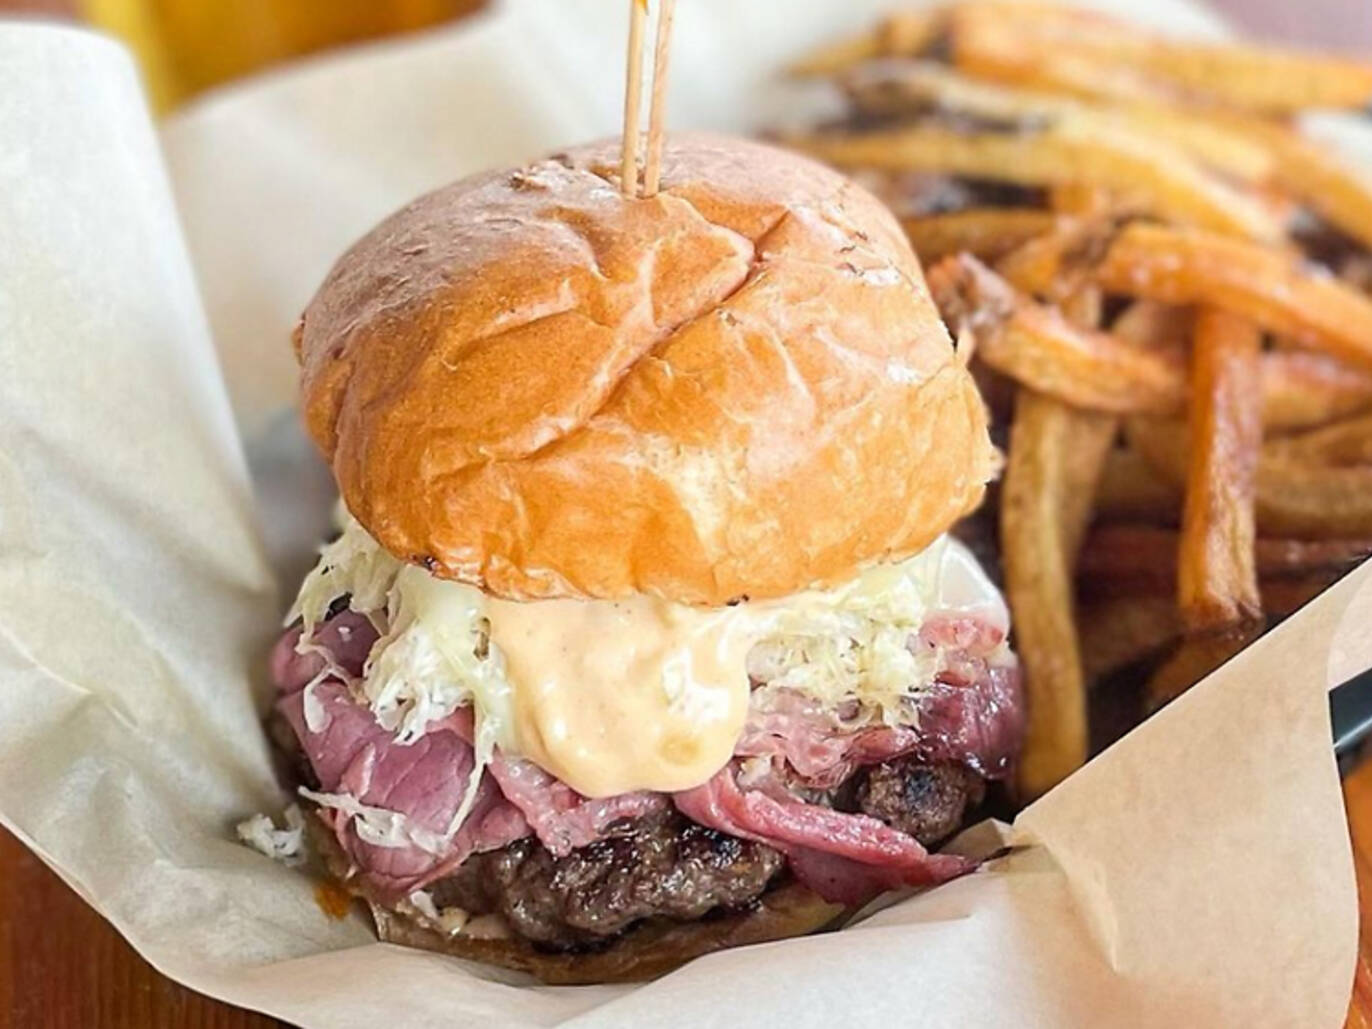 50 Best Burgers In America For Every State Best Burgers In Us 